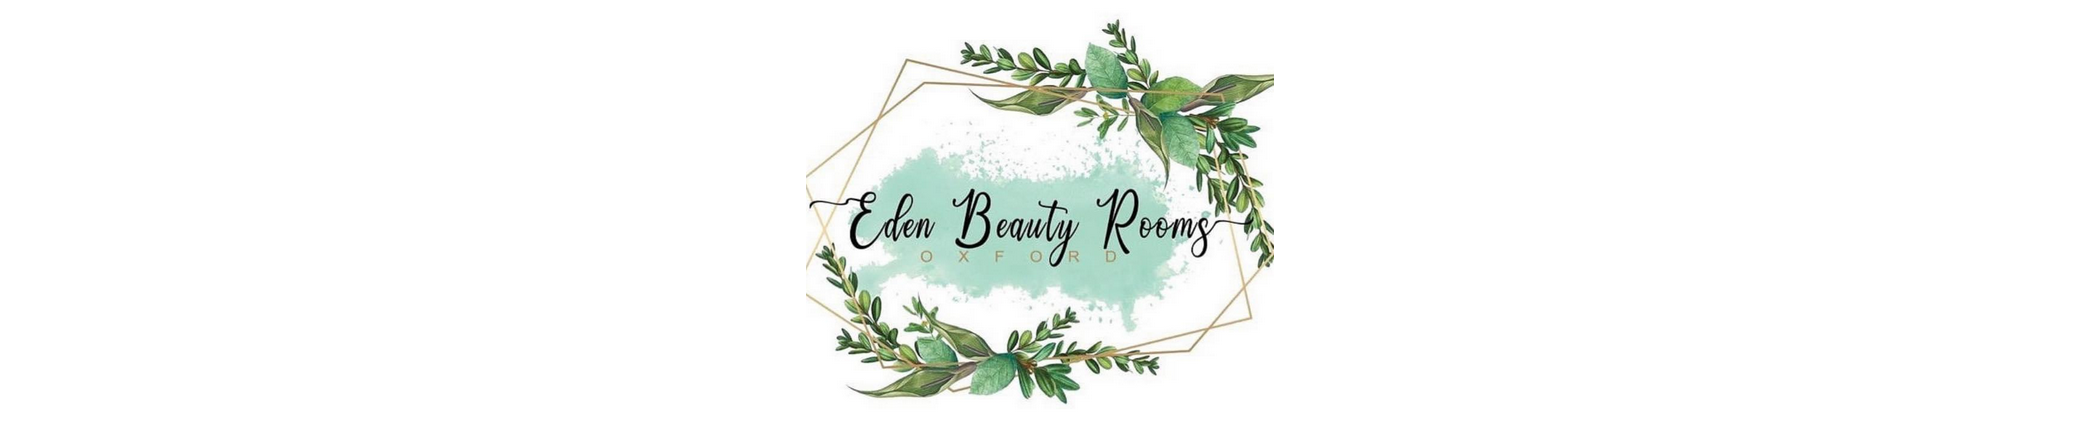 About Eden Beauty Rooms - Eden Beauty Rooms Oxford